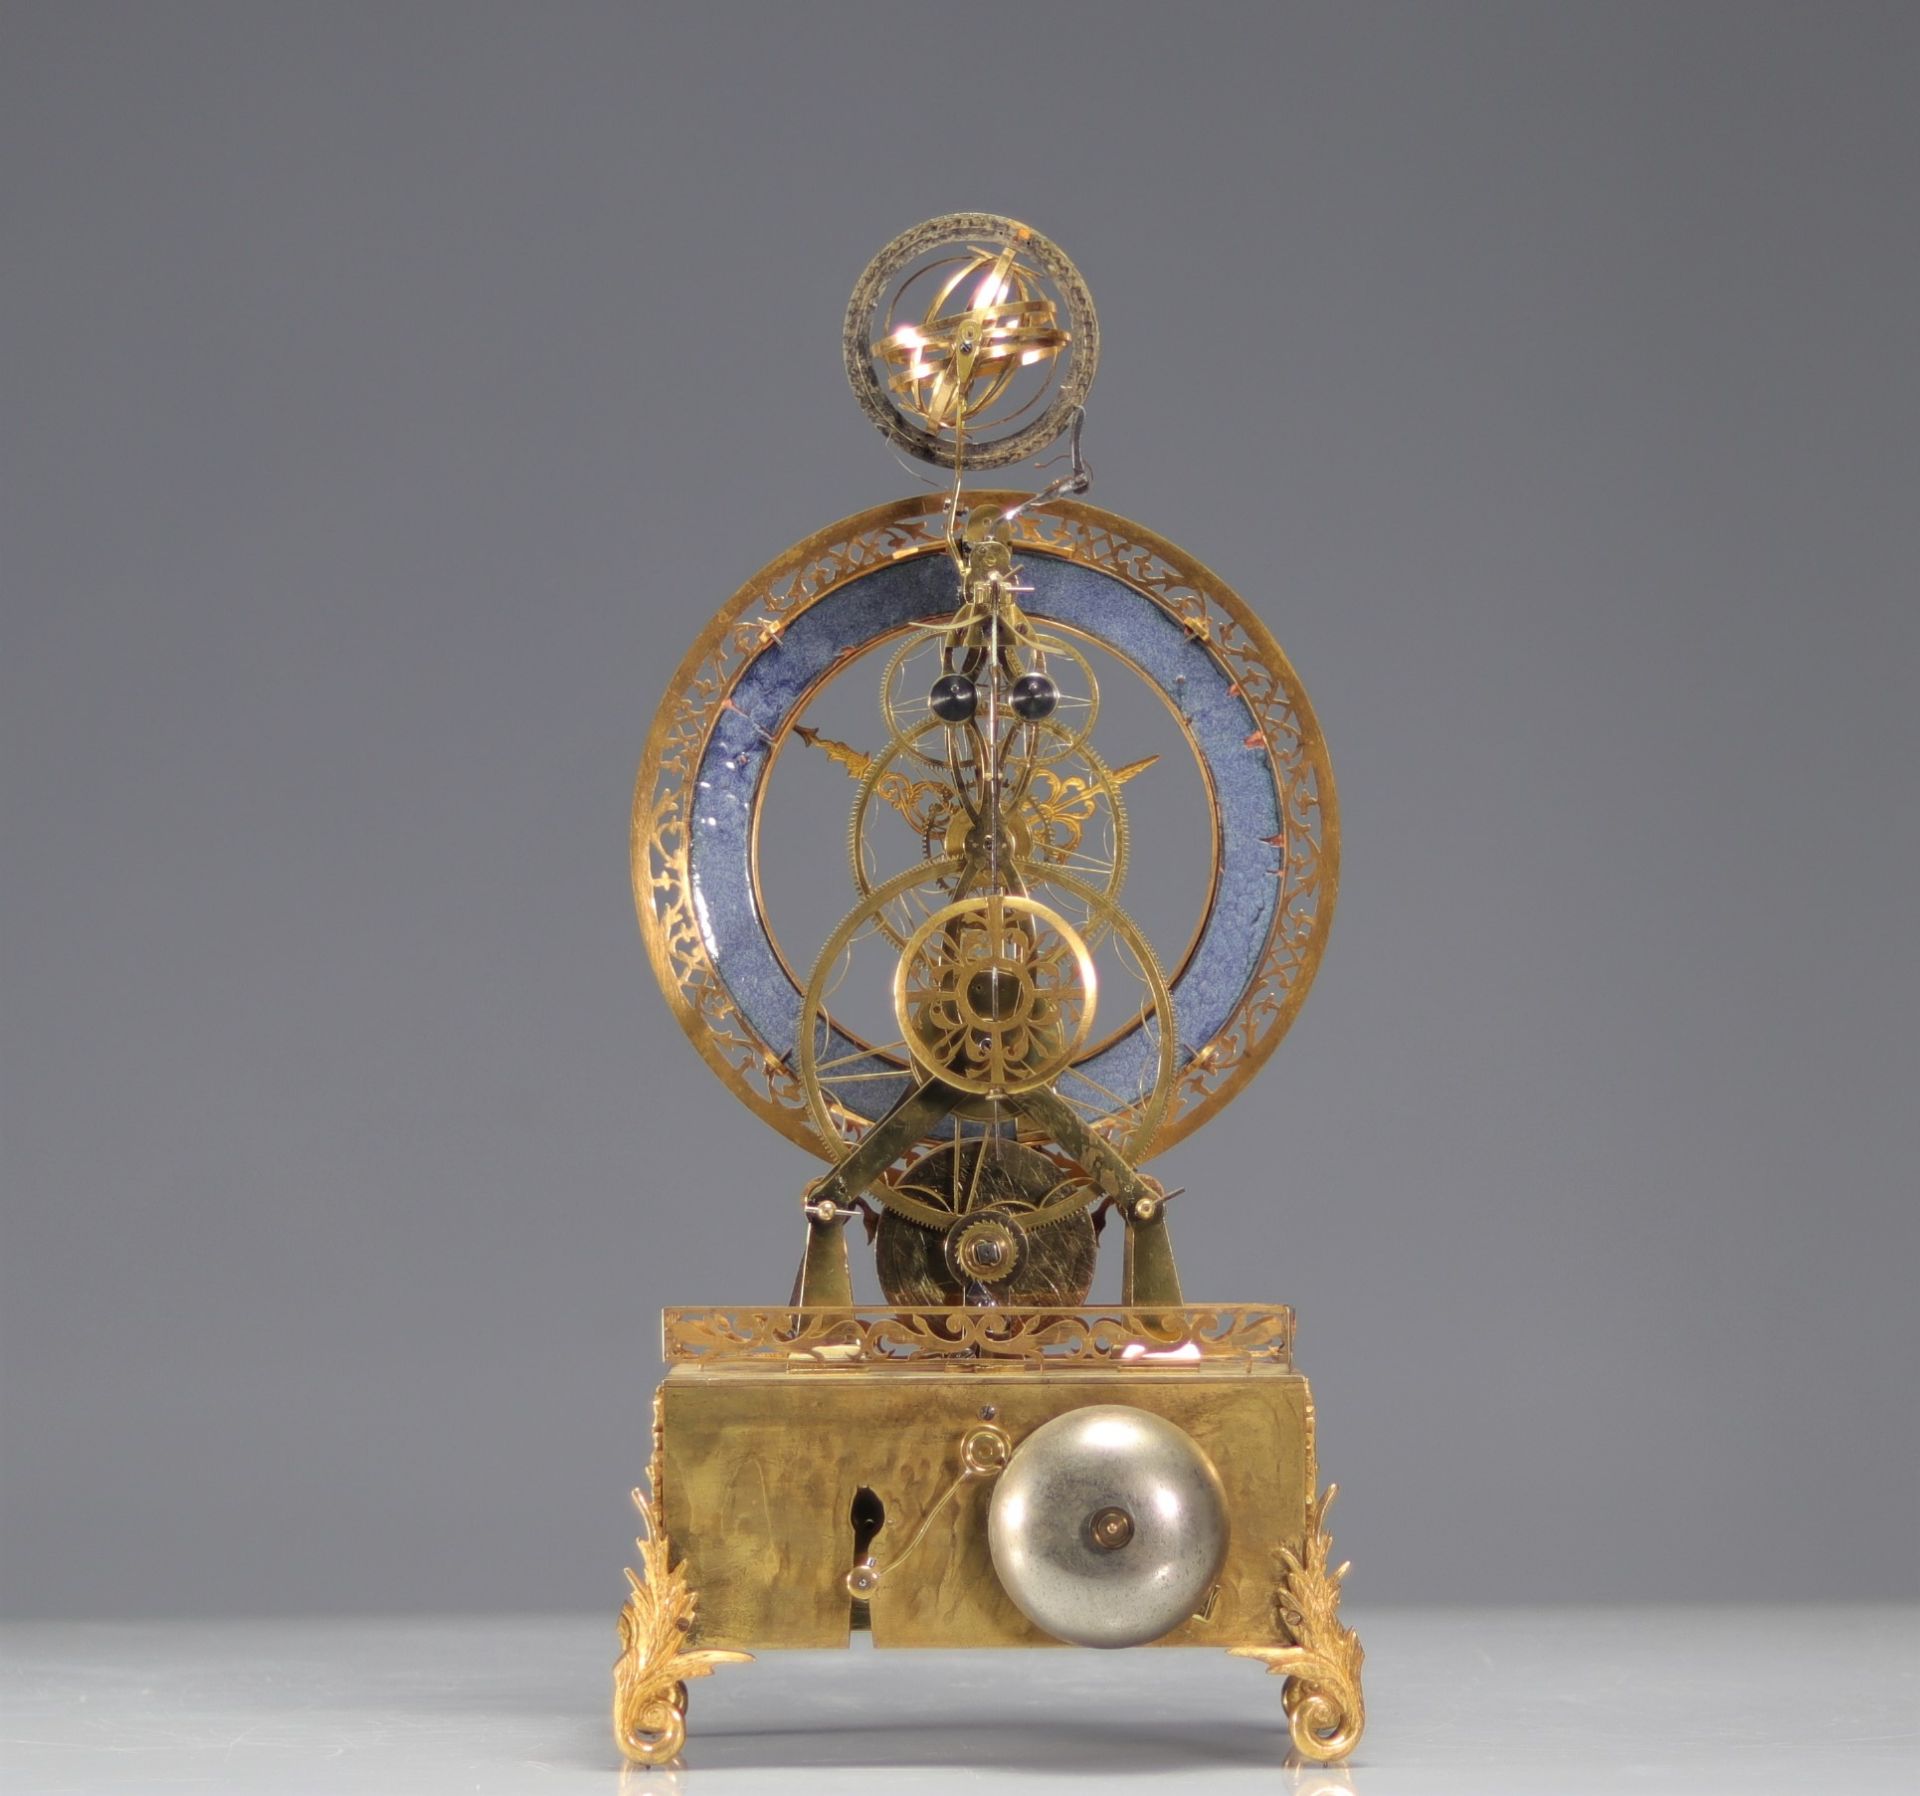 Rare skeleton clock with movement of the stars signed Aerts in Tongres - Image 3 of 8